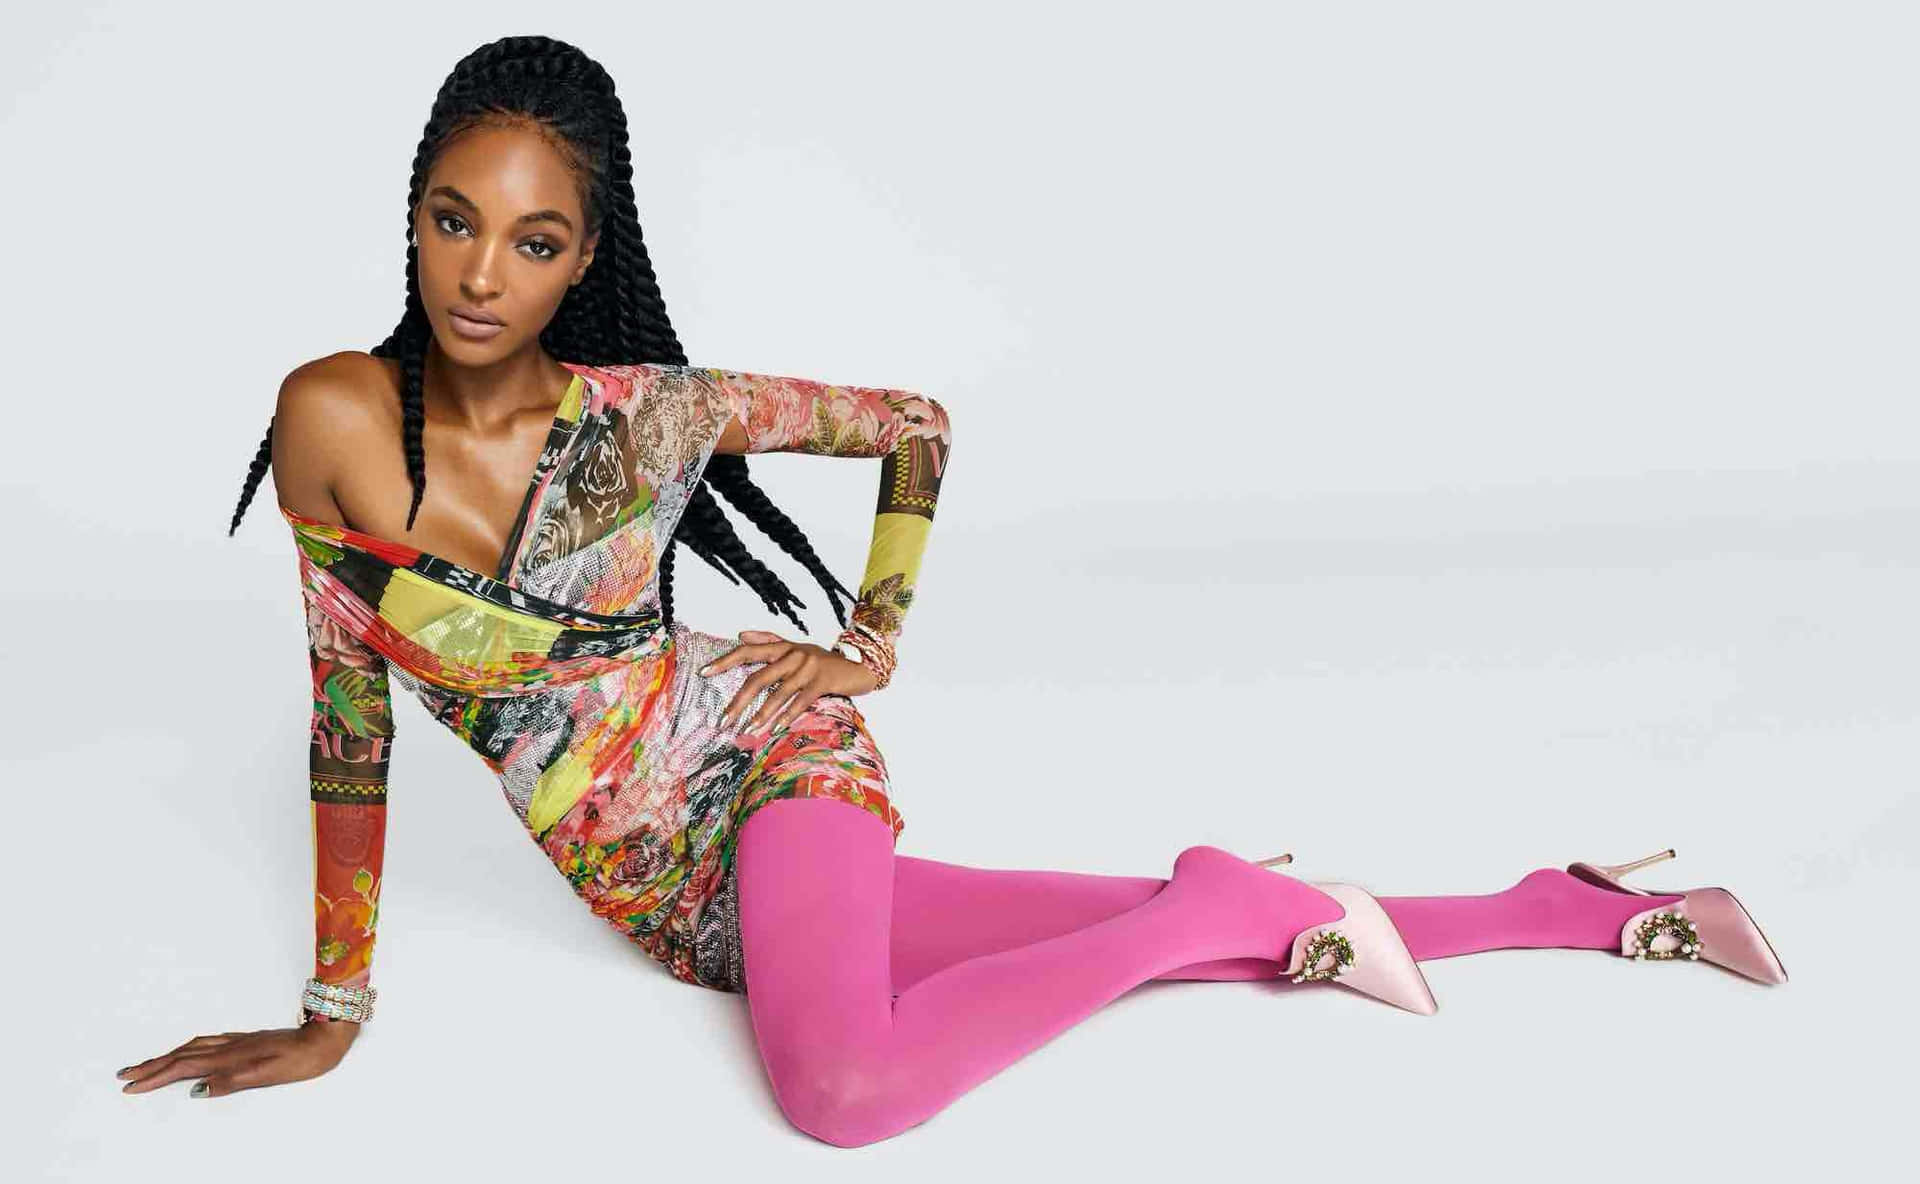 Fashion Modelin Colorful Outfitand Pink Tights Wallpaper